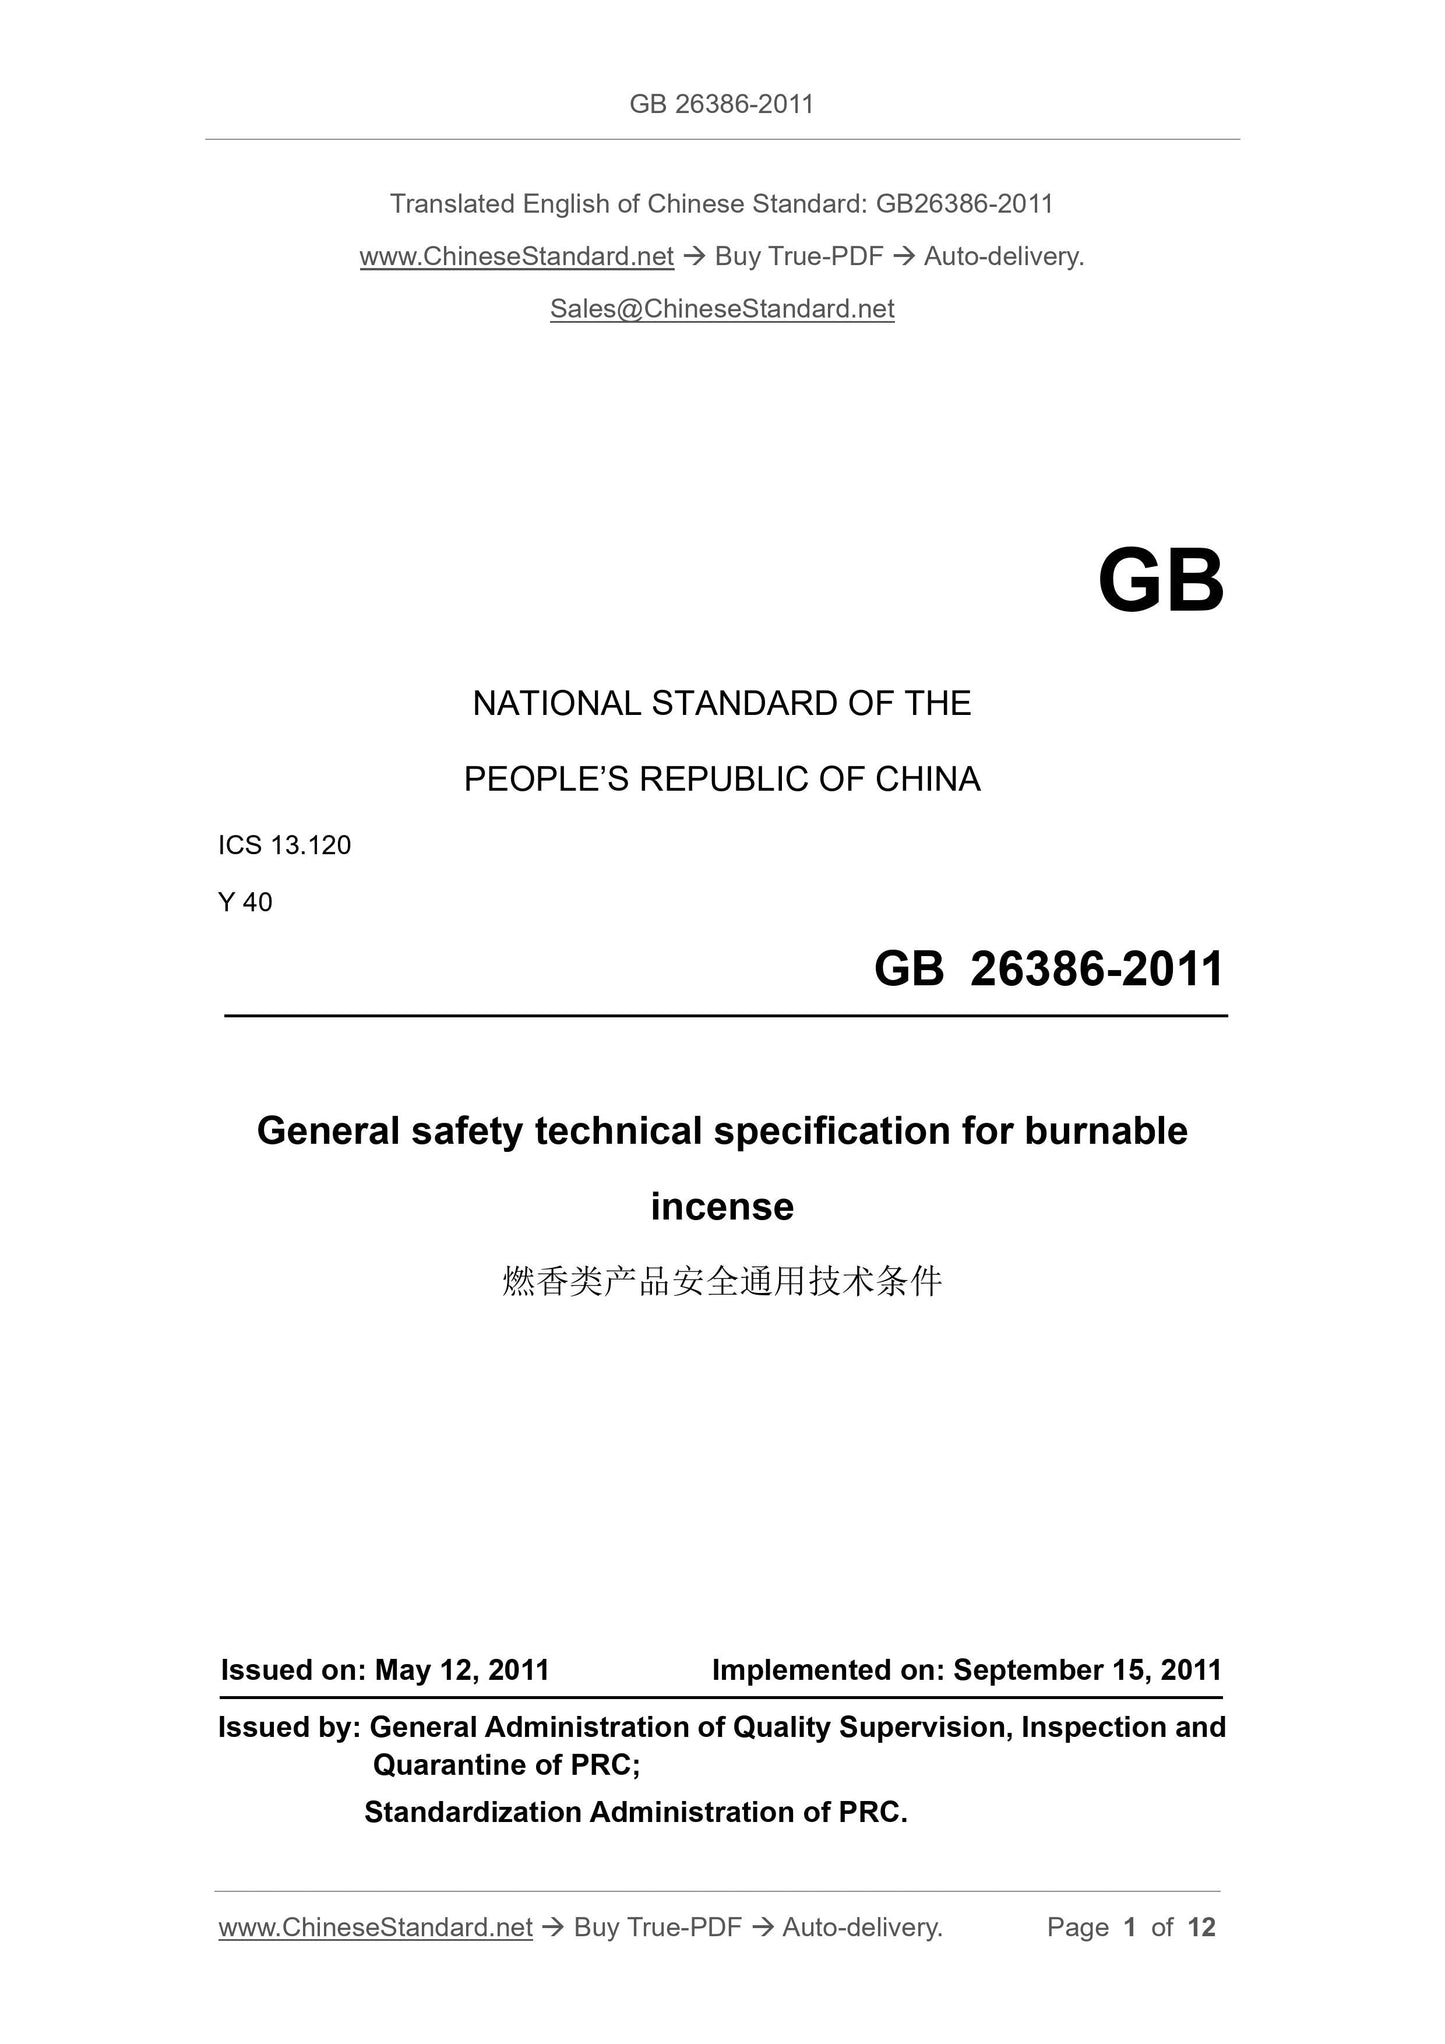 GB 26386-2011 Page 1